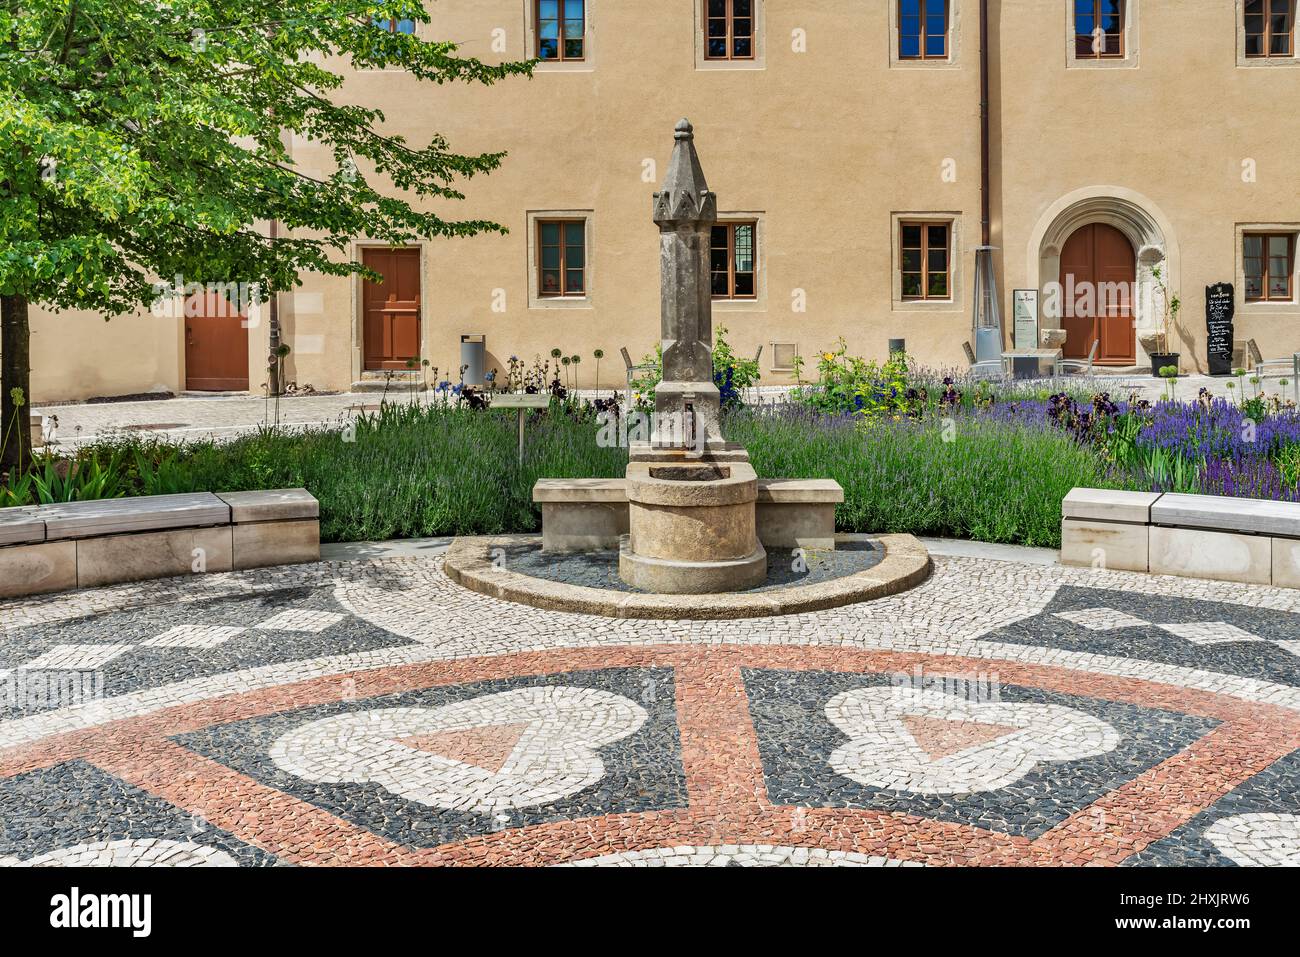 Röhrwasserbrunnen (Tubular water fountain) in the courtyard of the Luther House in Lutherstadt Wittenberg, Saxony-Anhalt, Germany, Europe Stock Photo